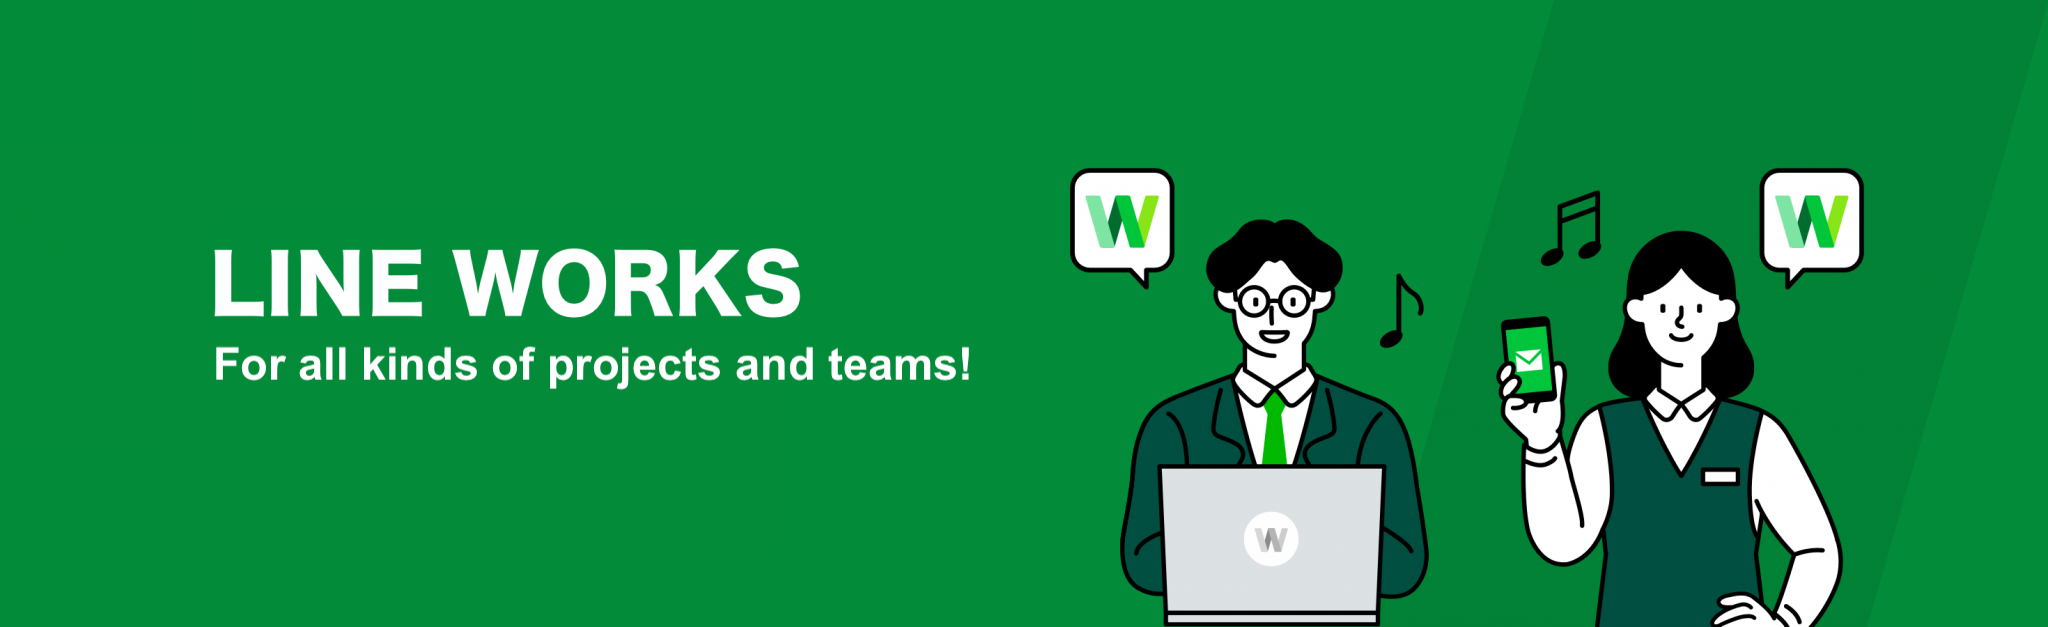 line works for all projects and teams